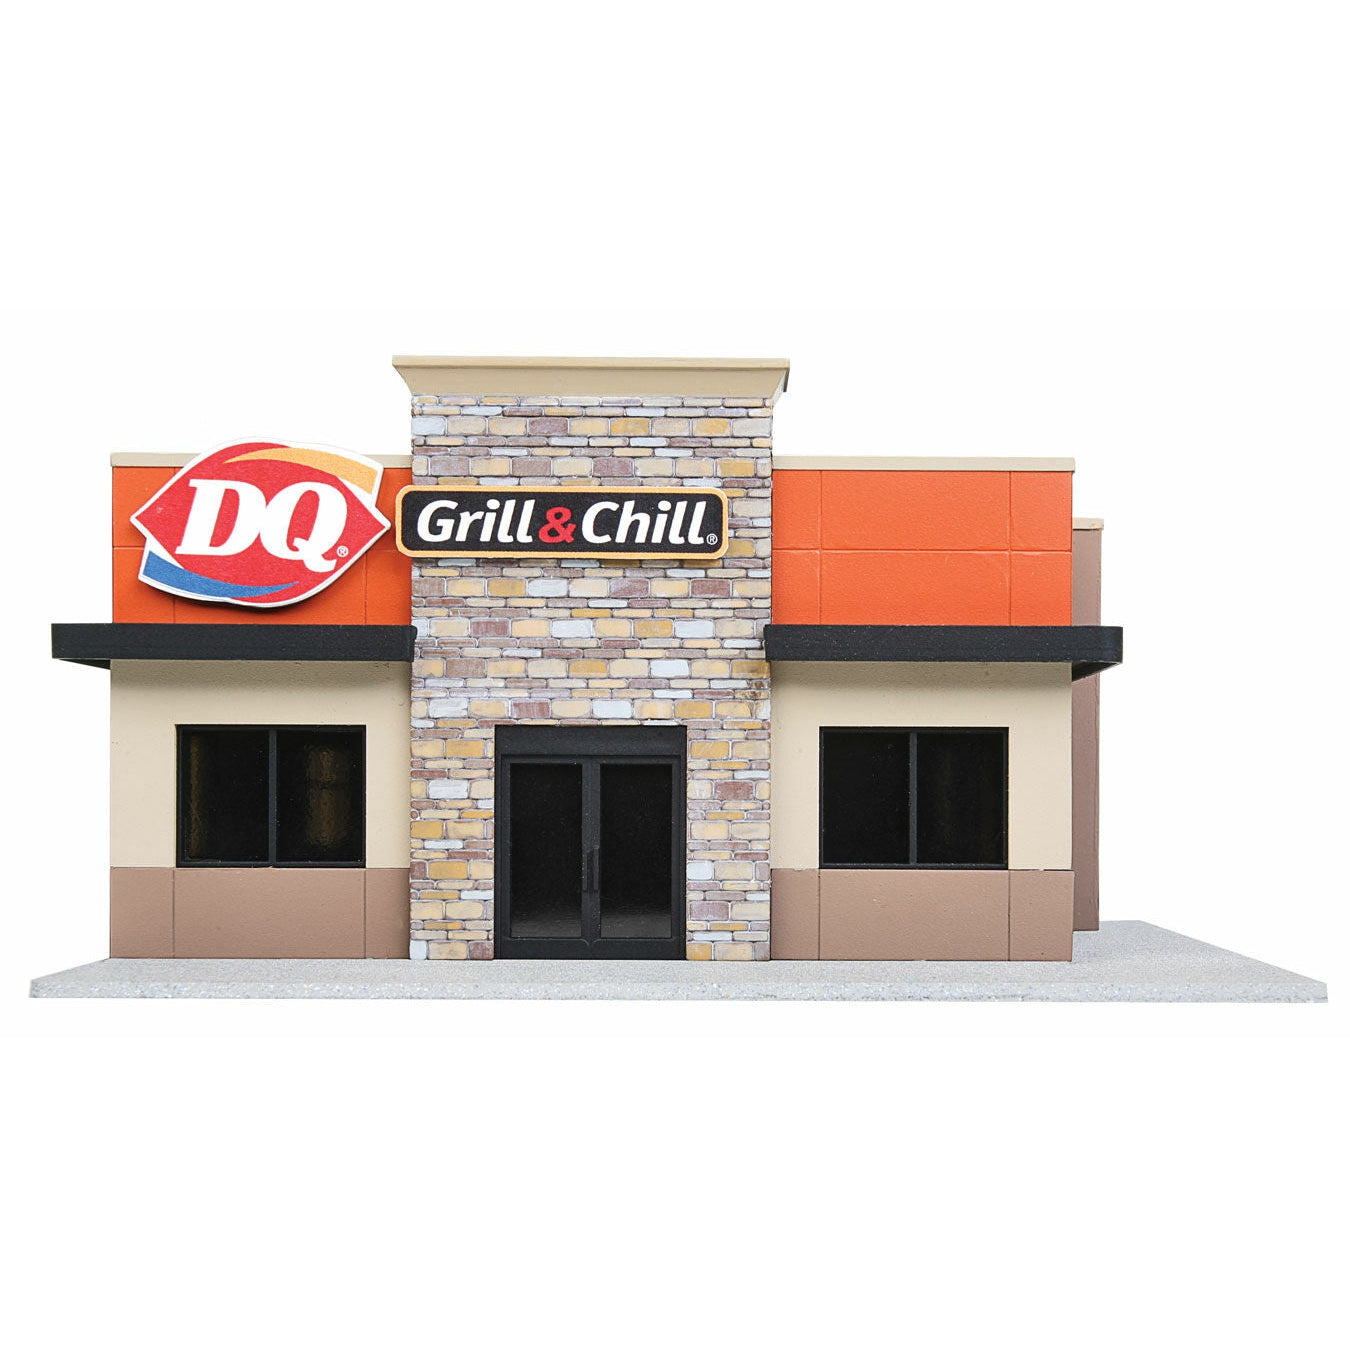 Walthers 933-3485 - HO DQ Grill & Chill(R) -- Kit - 7-1/4 x 5-3/8 x 2-3/4" 18.4 x 13.6 x 6.9cm